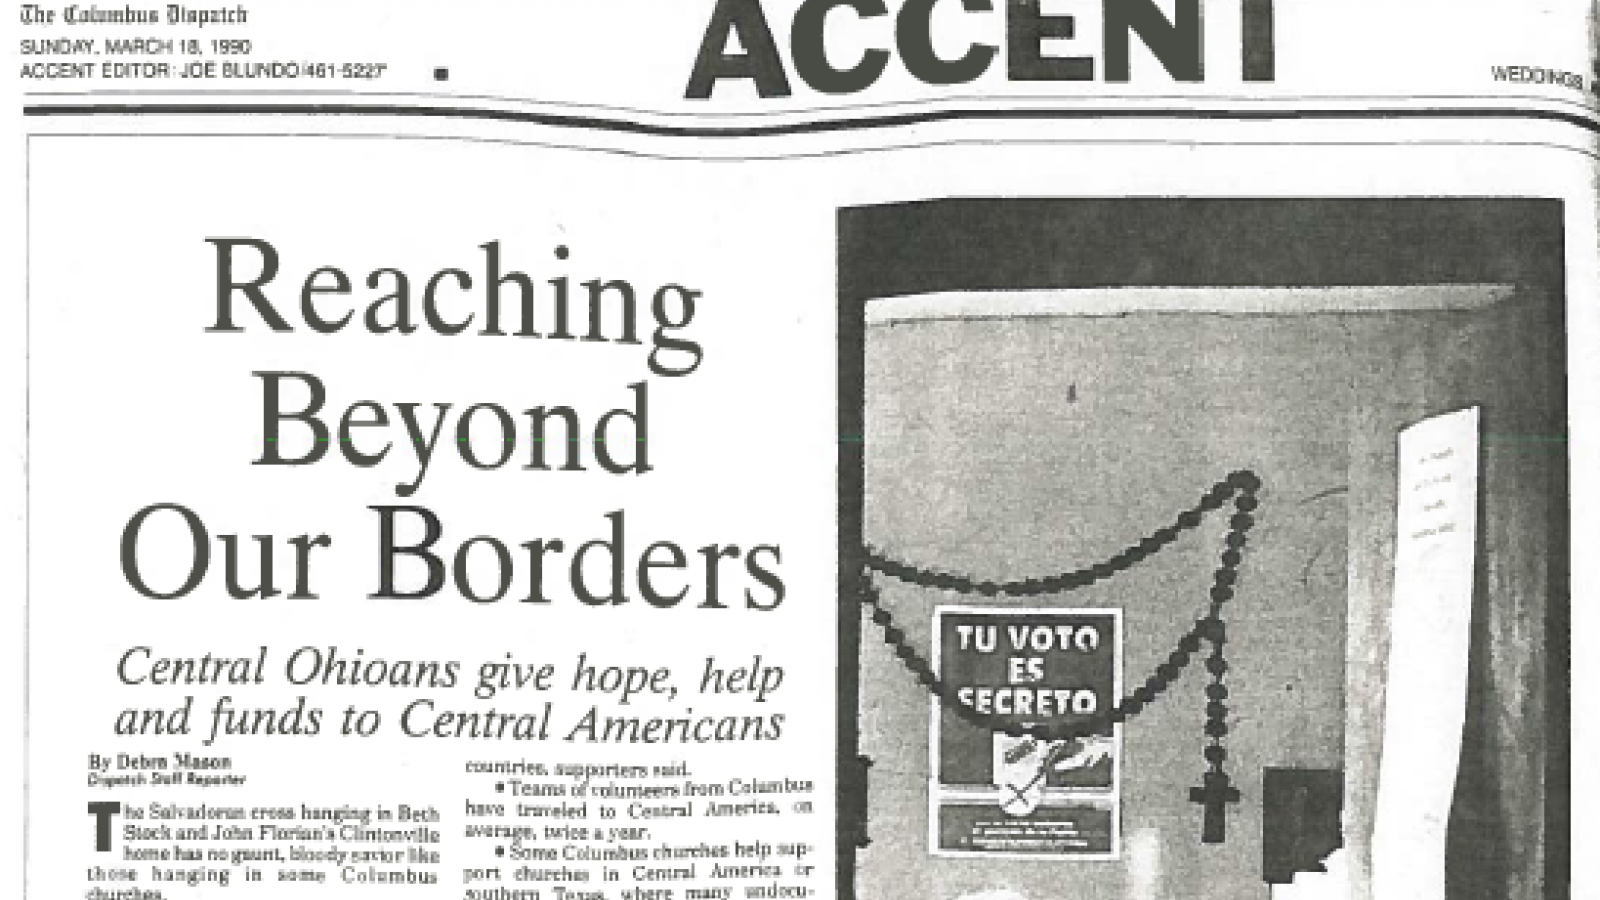 "Reaching Beyond Our Borders" Columbus Dispatch March 18, 1990